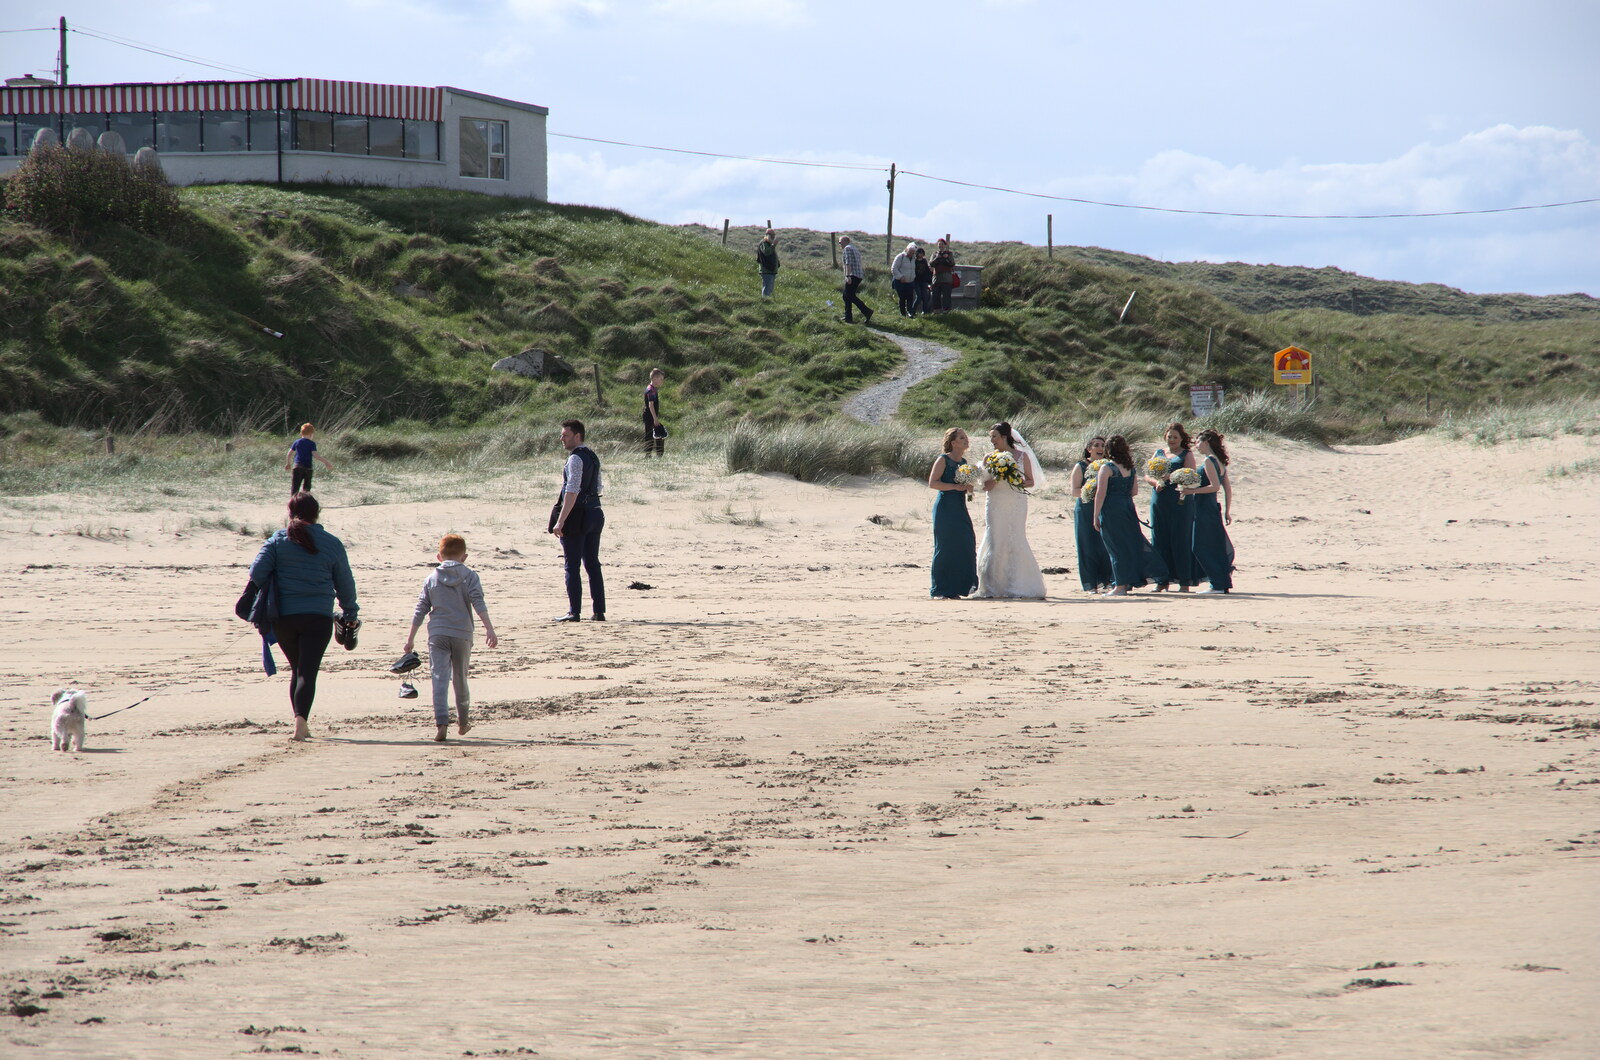 Greencastle, Doagh and Malin Head, County Donegal, Ireland - 19th April 2022: There's a wedding party on the beach